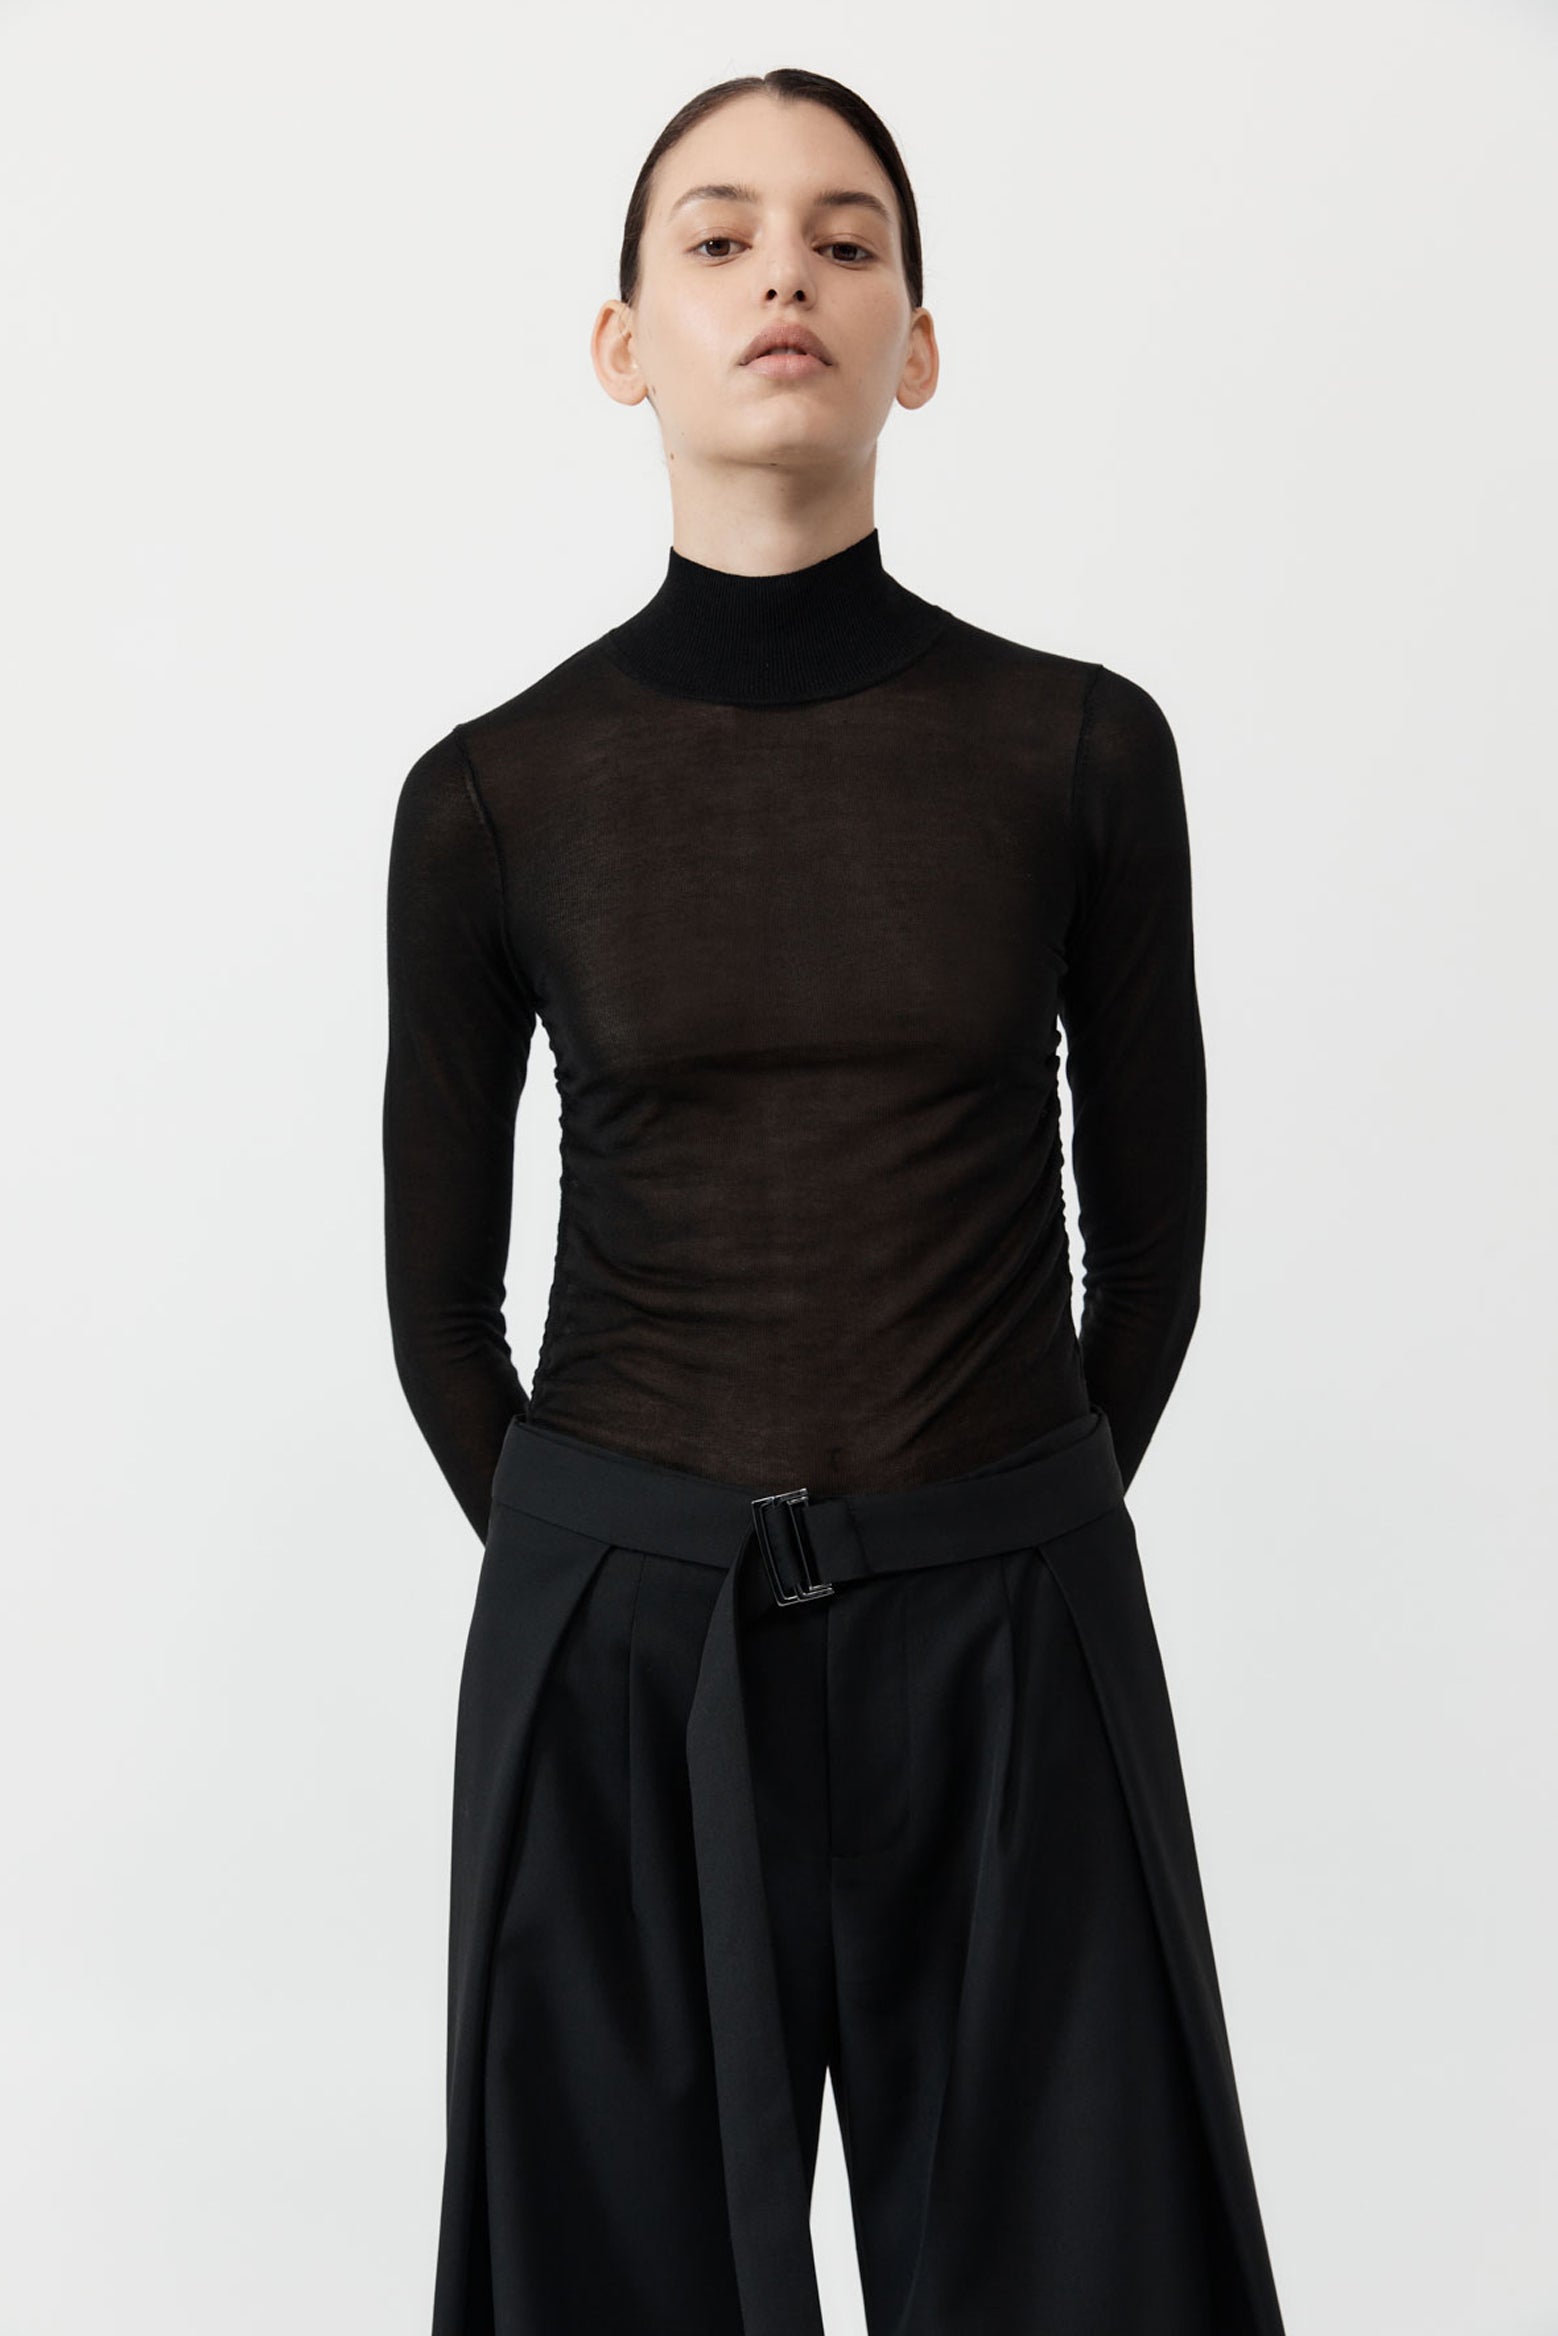 St Agni Sheer Ruched Top in Black available at The New Trend Australia.